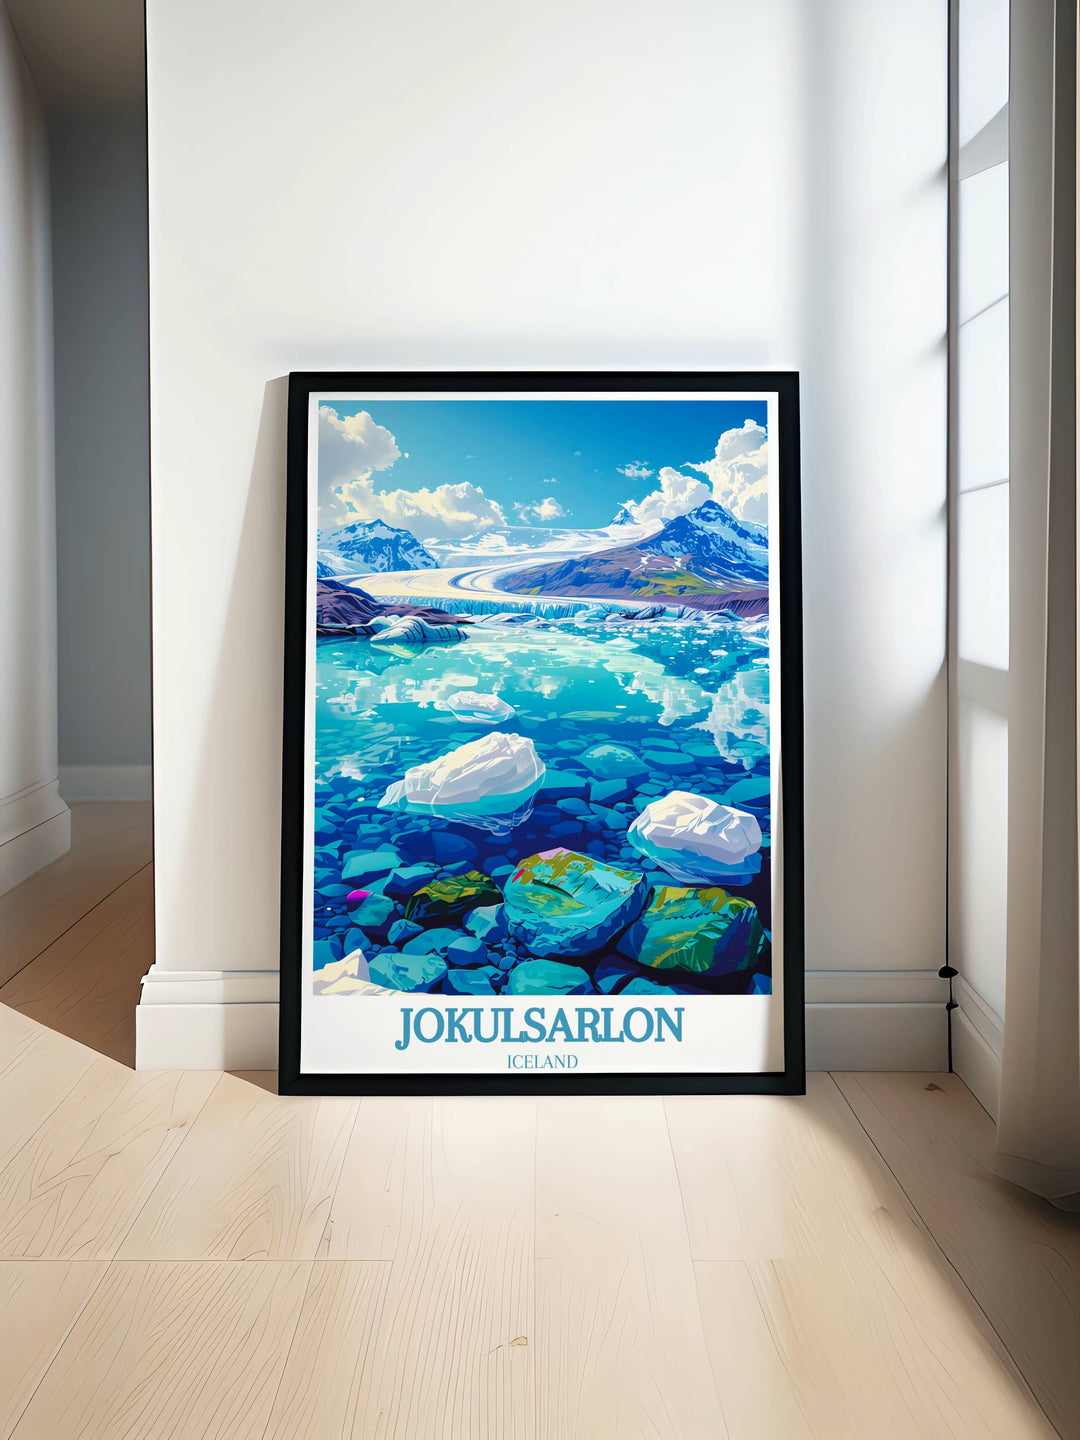 Tranquil beauty of Jokulsarlon Glacier Lagoon depicted in this watercolor print, perfect for Europe travel poster gifts